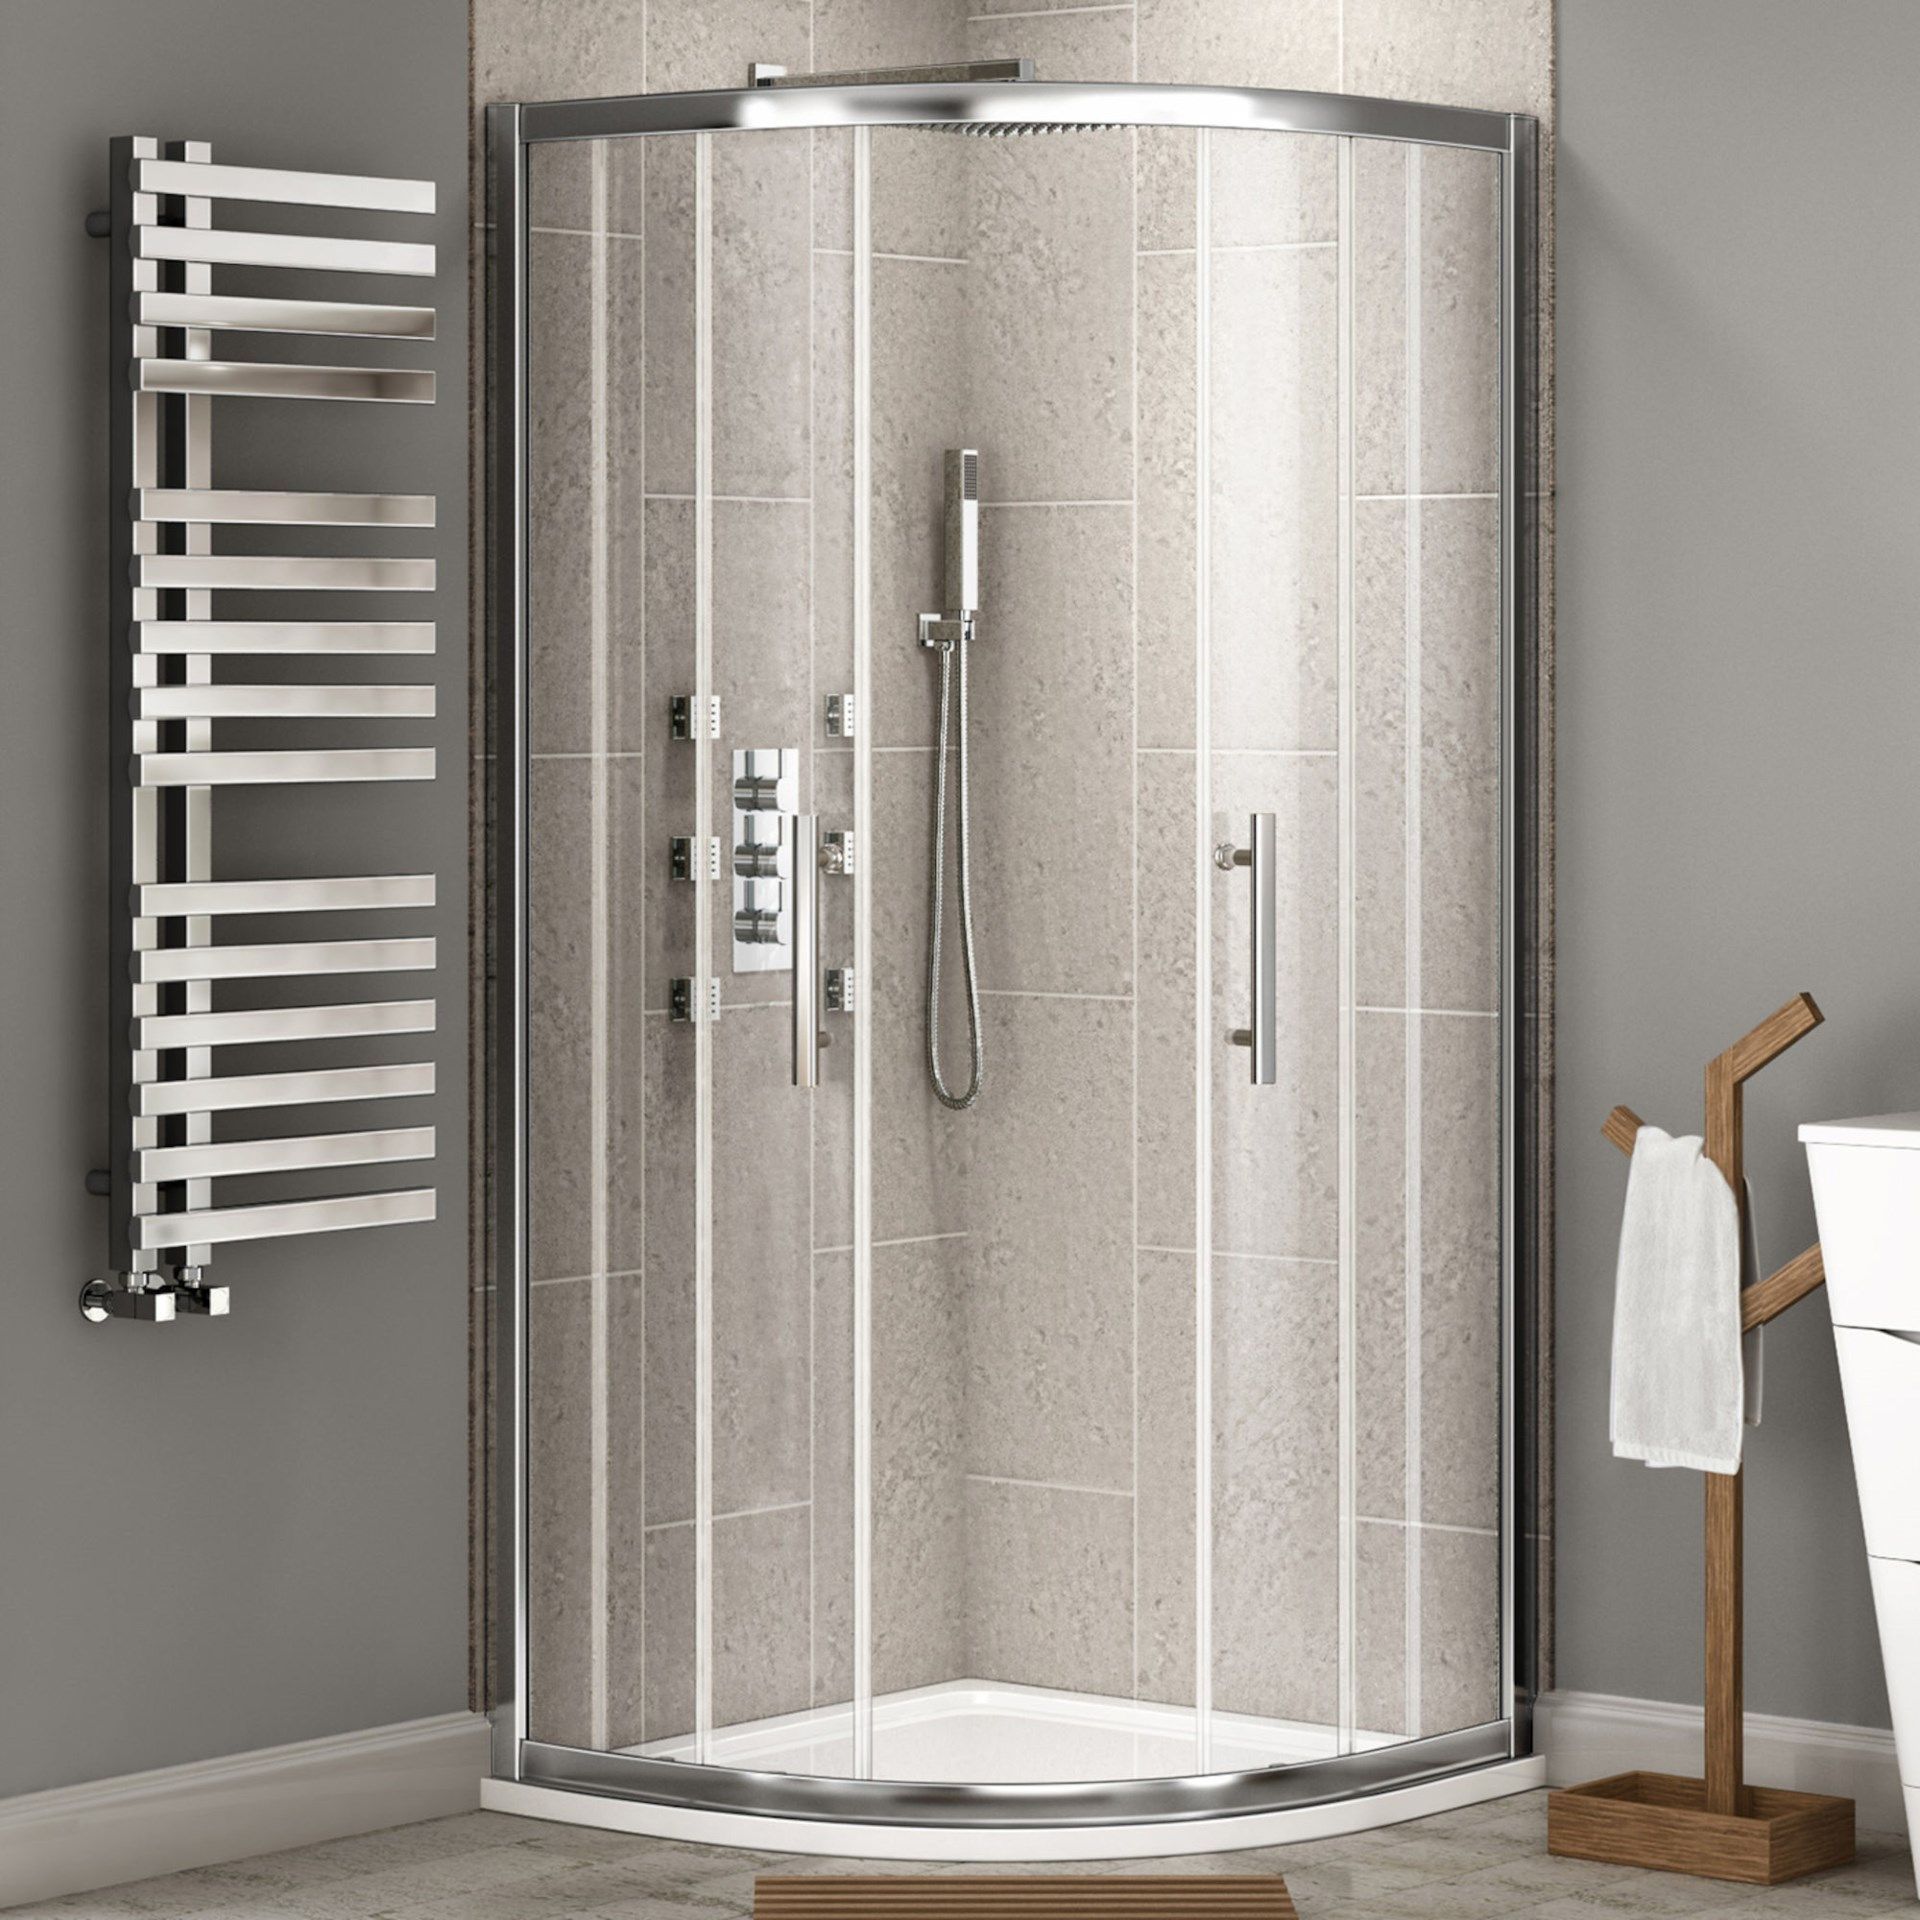 New 900x900 mm 2 Door Quadrant Shower Enclosure. RRP £398.29.Constructed Of 6 mm Lightweight Sa... - Image 2 of 2